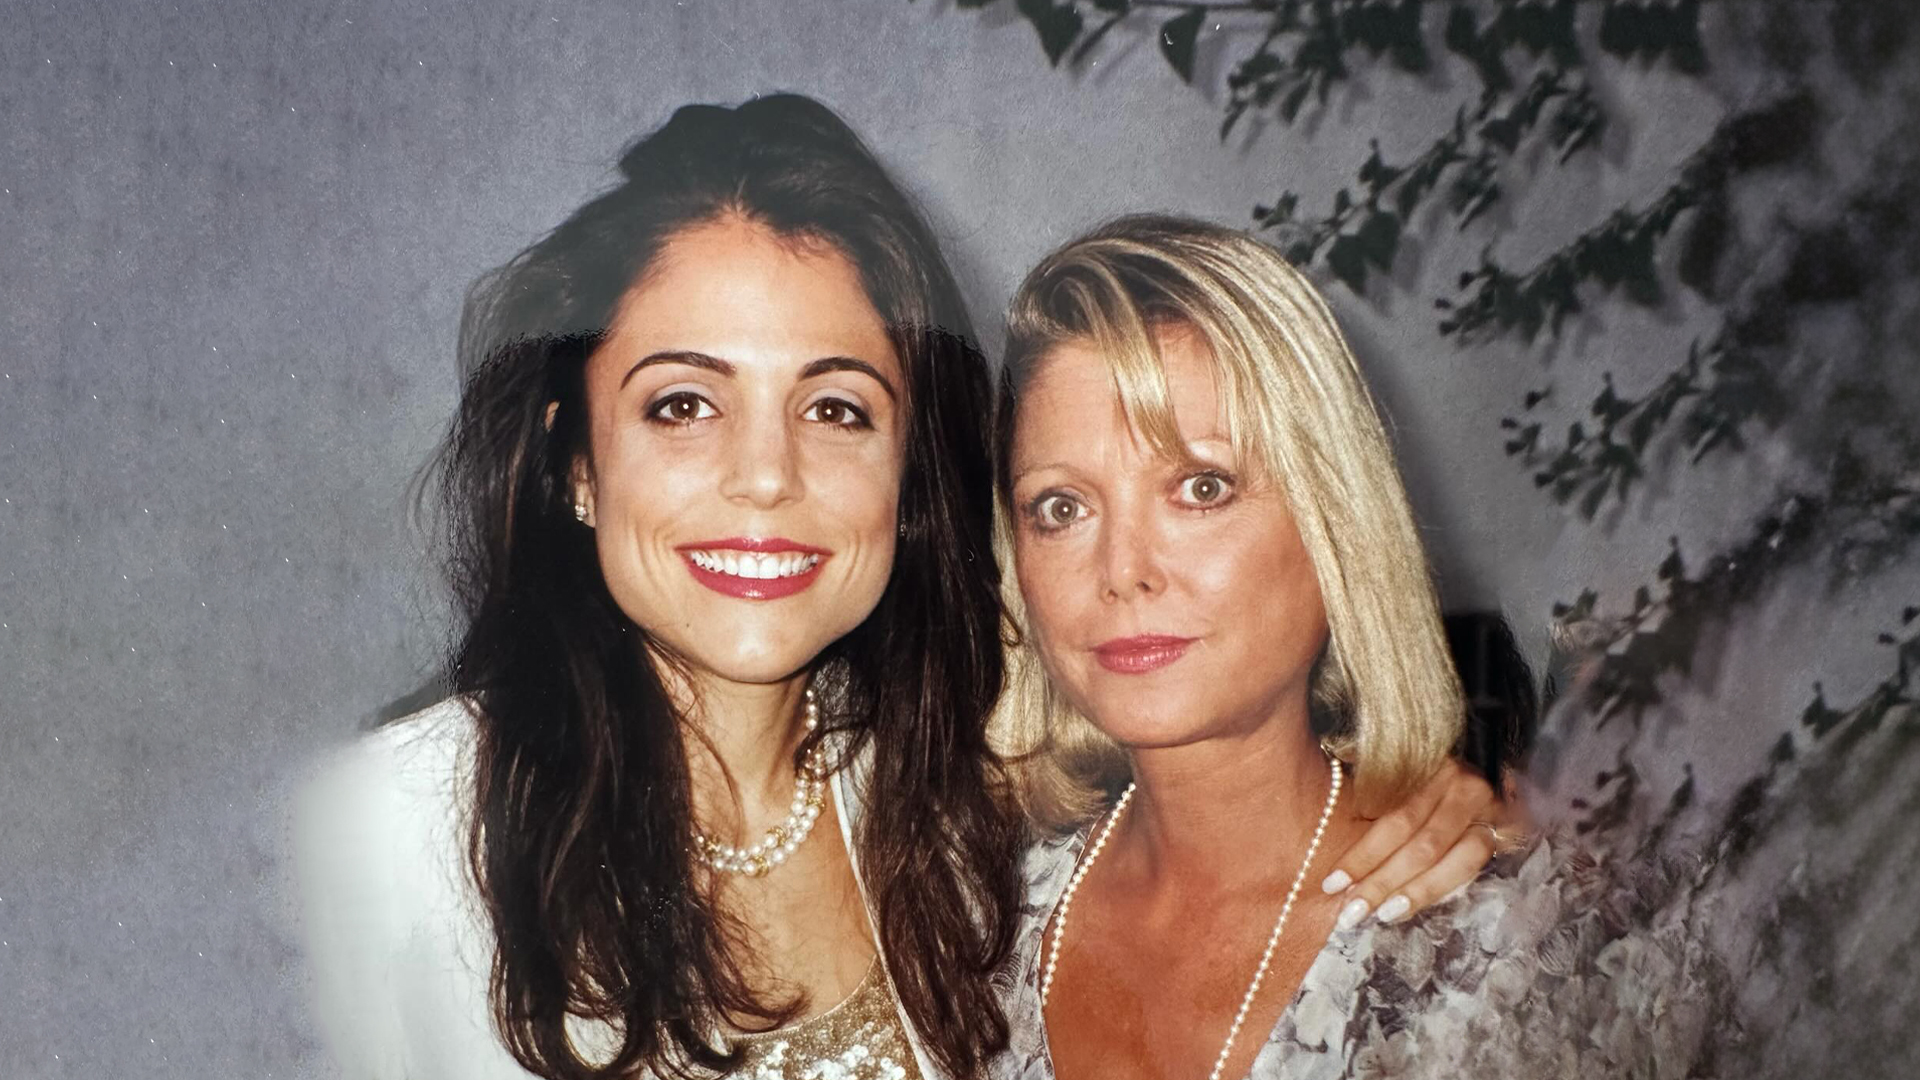 Bethenny Frankel mourns the loss of her selfish mother Bernadette Birk who fought demons before dying of lung cancer [Video]